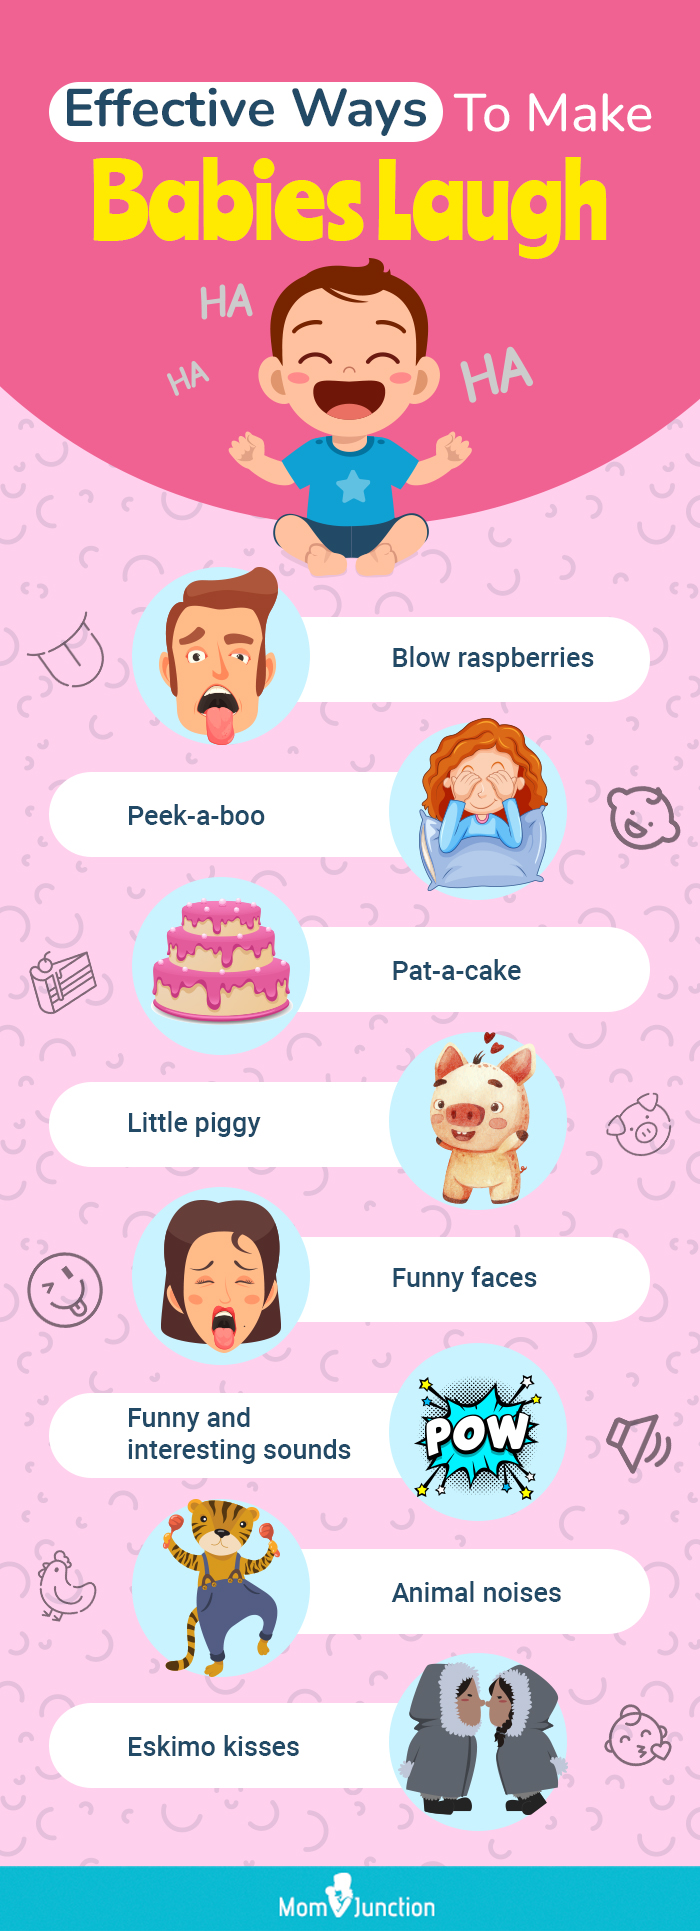 effective ways to make babies laugh [infographic]